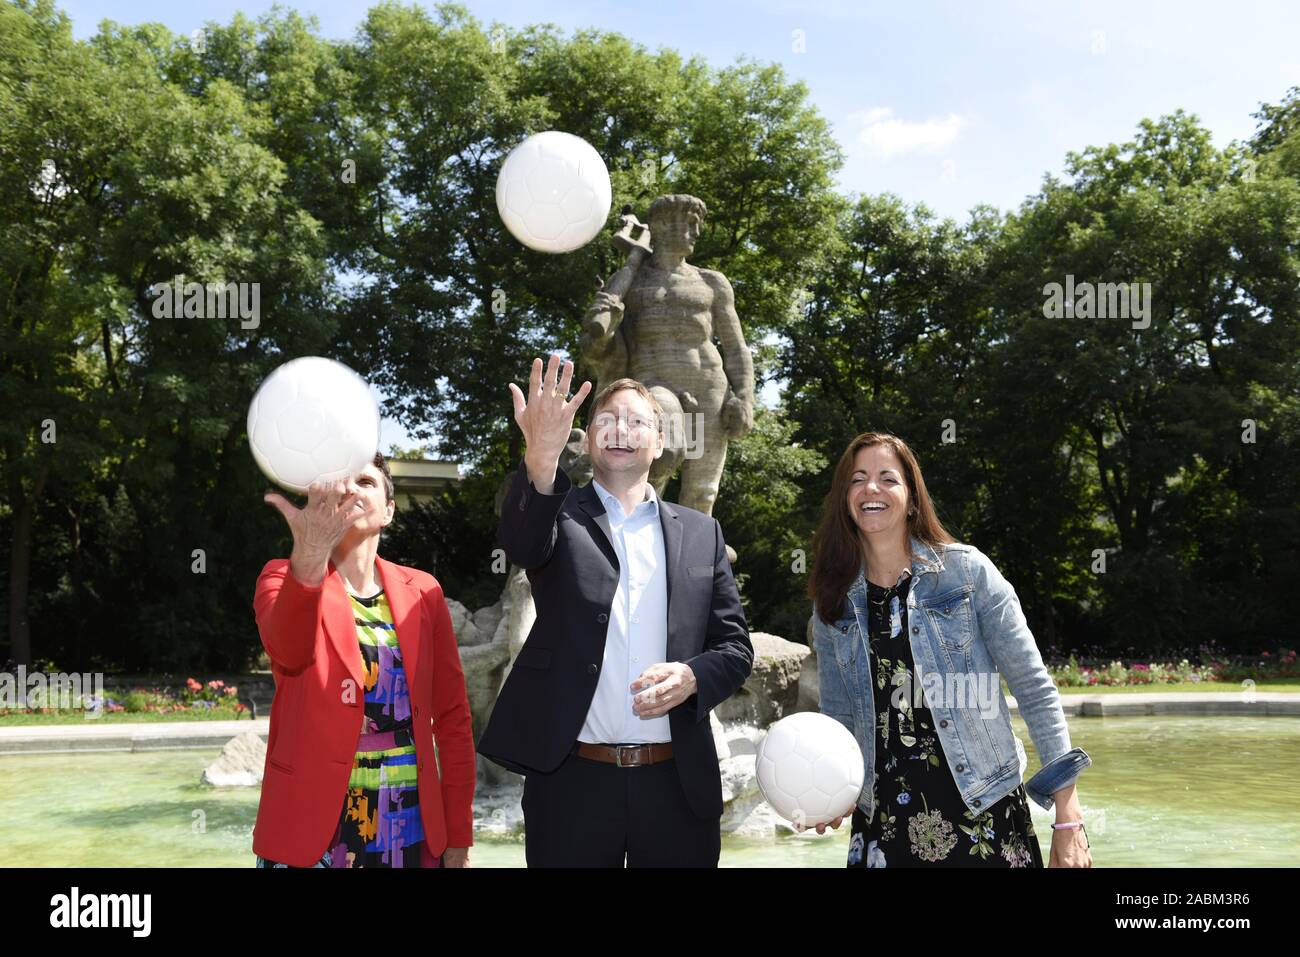 Kristina Frank (right) and Beatrix Zurek from the City of Munich present together with the Bavarian Minister of Construction, Dr. Hans Reichhart, the plans for the Fan Meeting Point for the European Football Championship 2020 in the Old Botanical Garden. [automated translation] Stock Photo